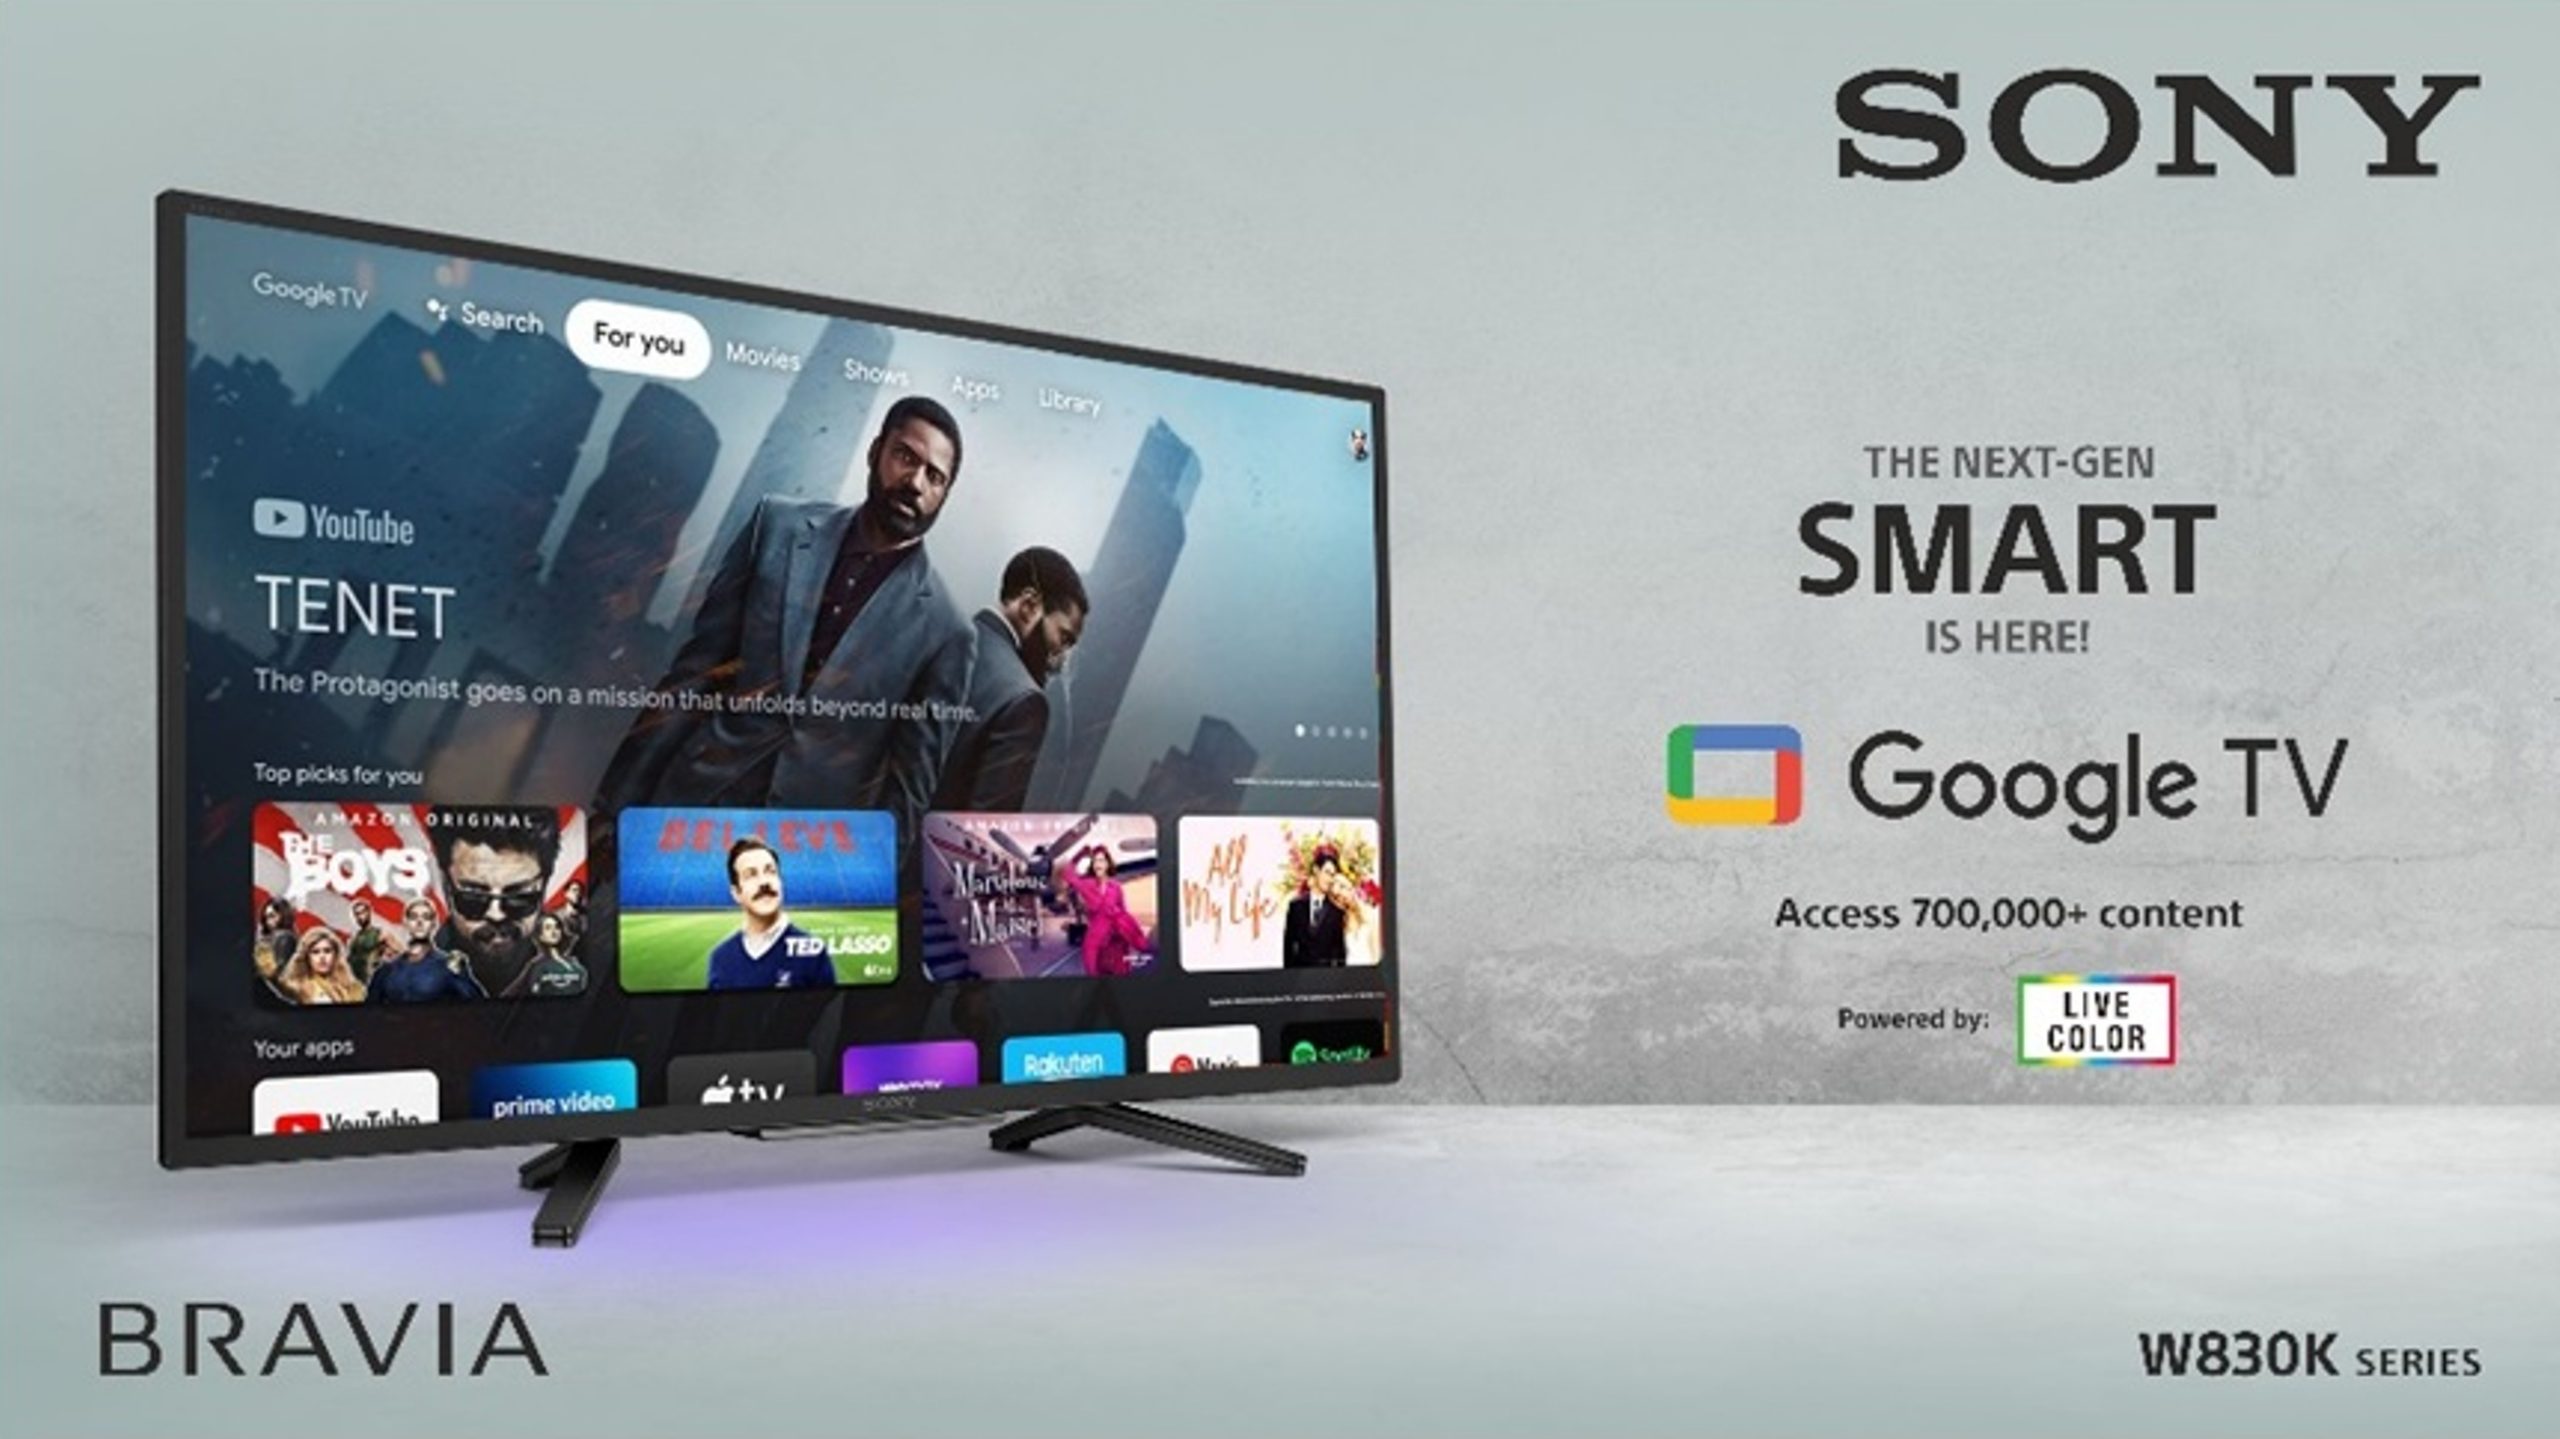 Google TV is the new Android TV, coming to Sony smart TVs this year - CNET